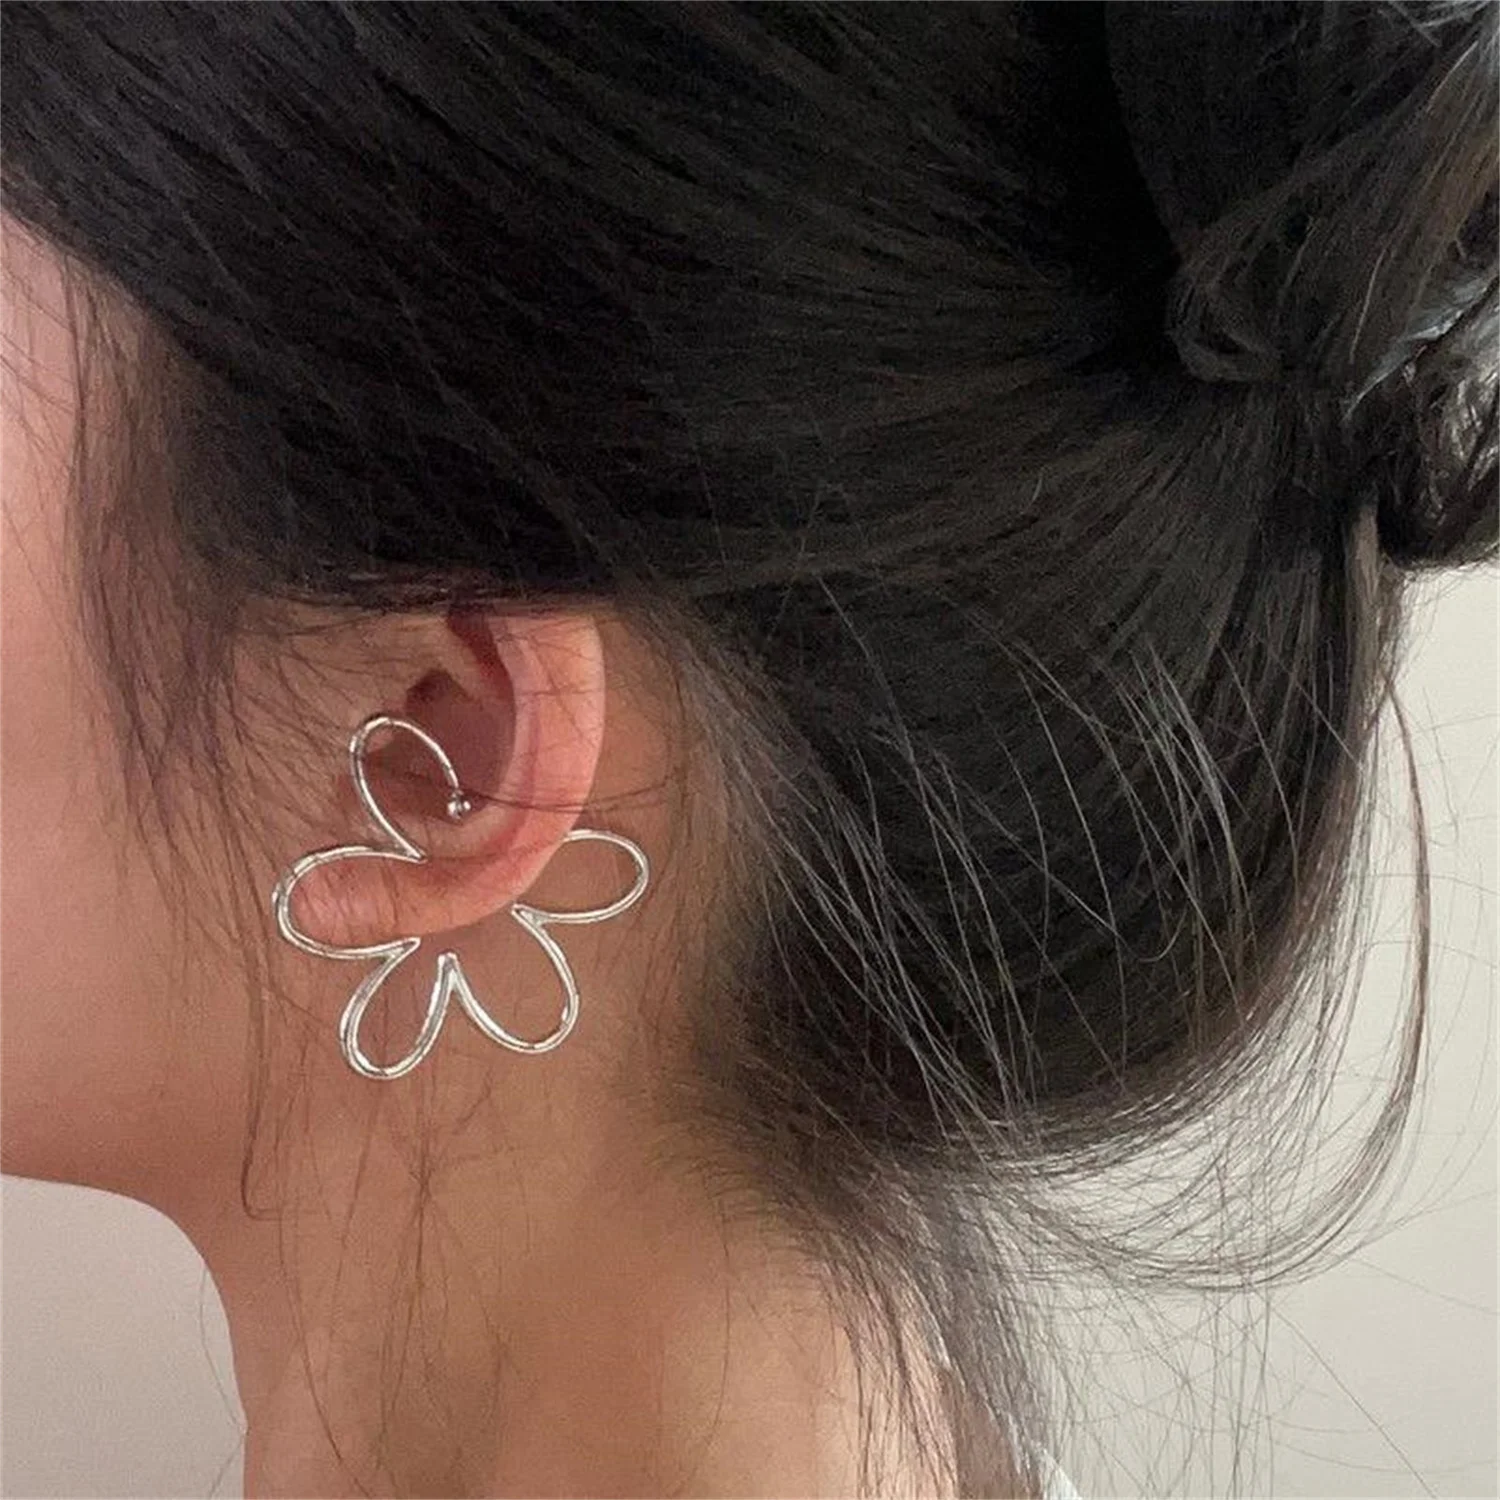 

1/2Pc Fashion Exaggerated Hollow Flower Ear Bone Clip Non-Pierced Earring Silver Color Ear Cuff for Women Girl Aesthetic Jewelry